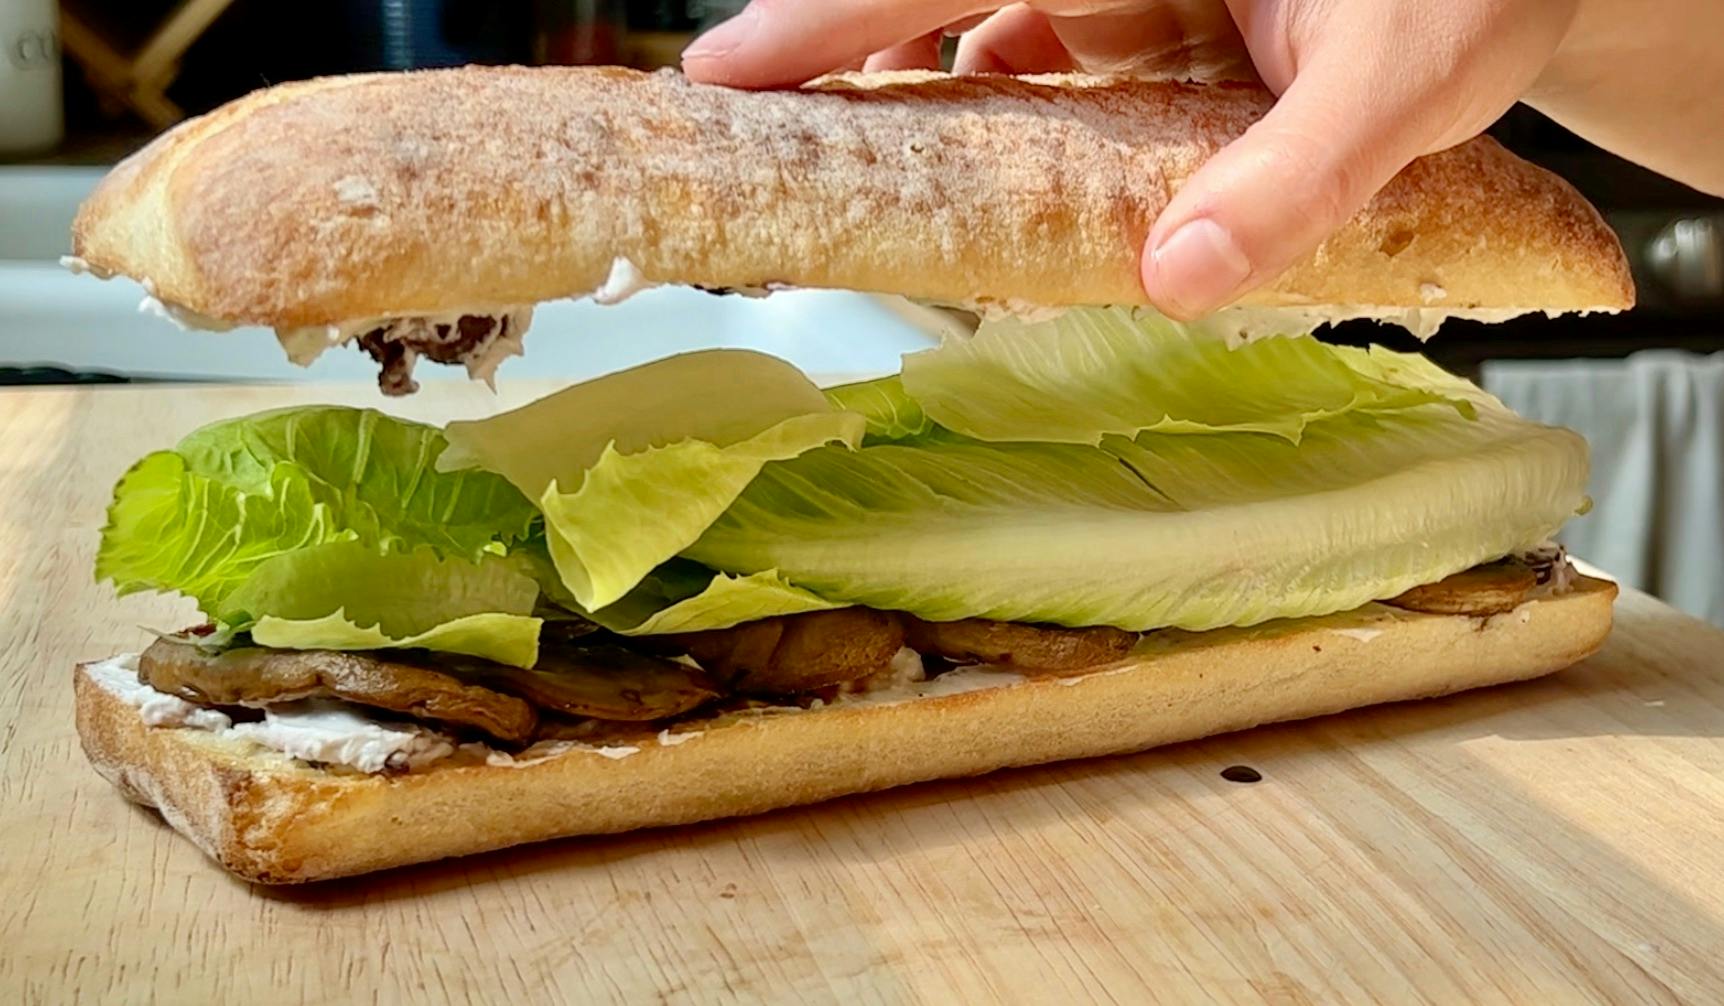 Placing the top piece of bread on top of the sandwich